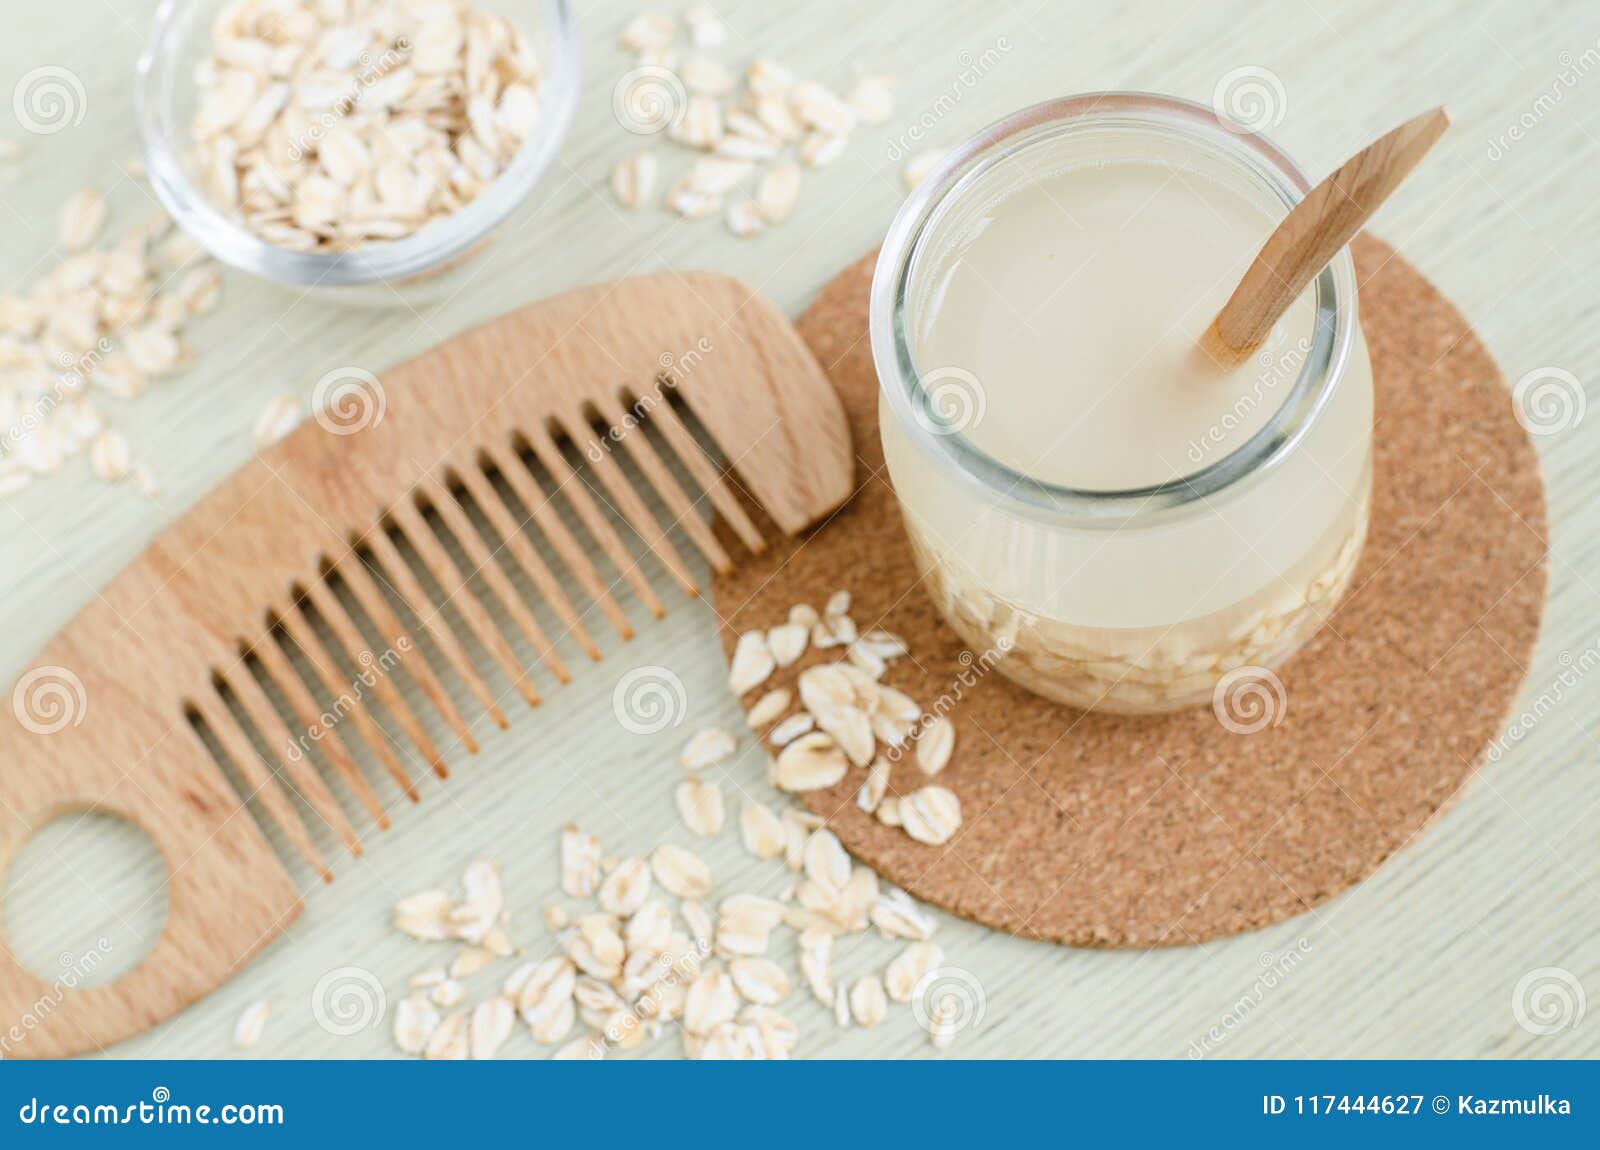 Homemade Oatmeal Hair Cleanser and Wooden Hair Comb. DIY Oatmeal Milk or  Toner for Natural Skin and Haircare. Stock Image - Image of alternative,  cosmetics: 117444627